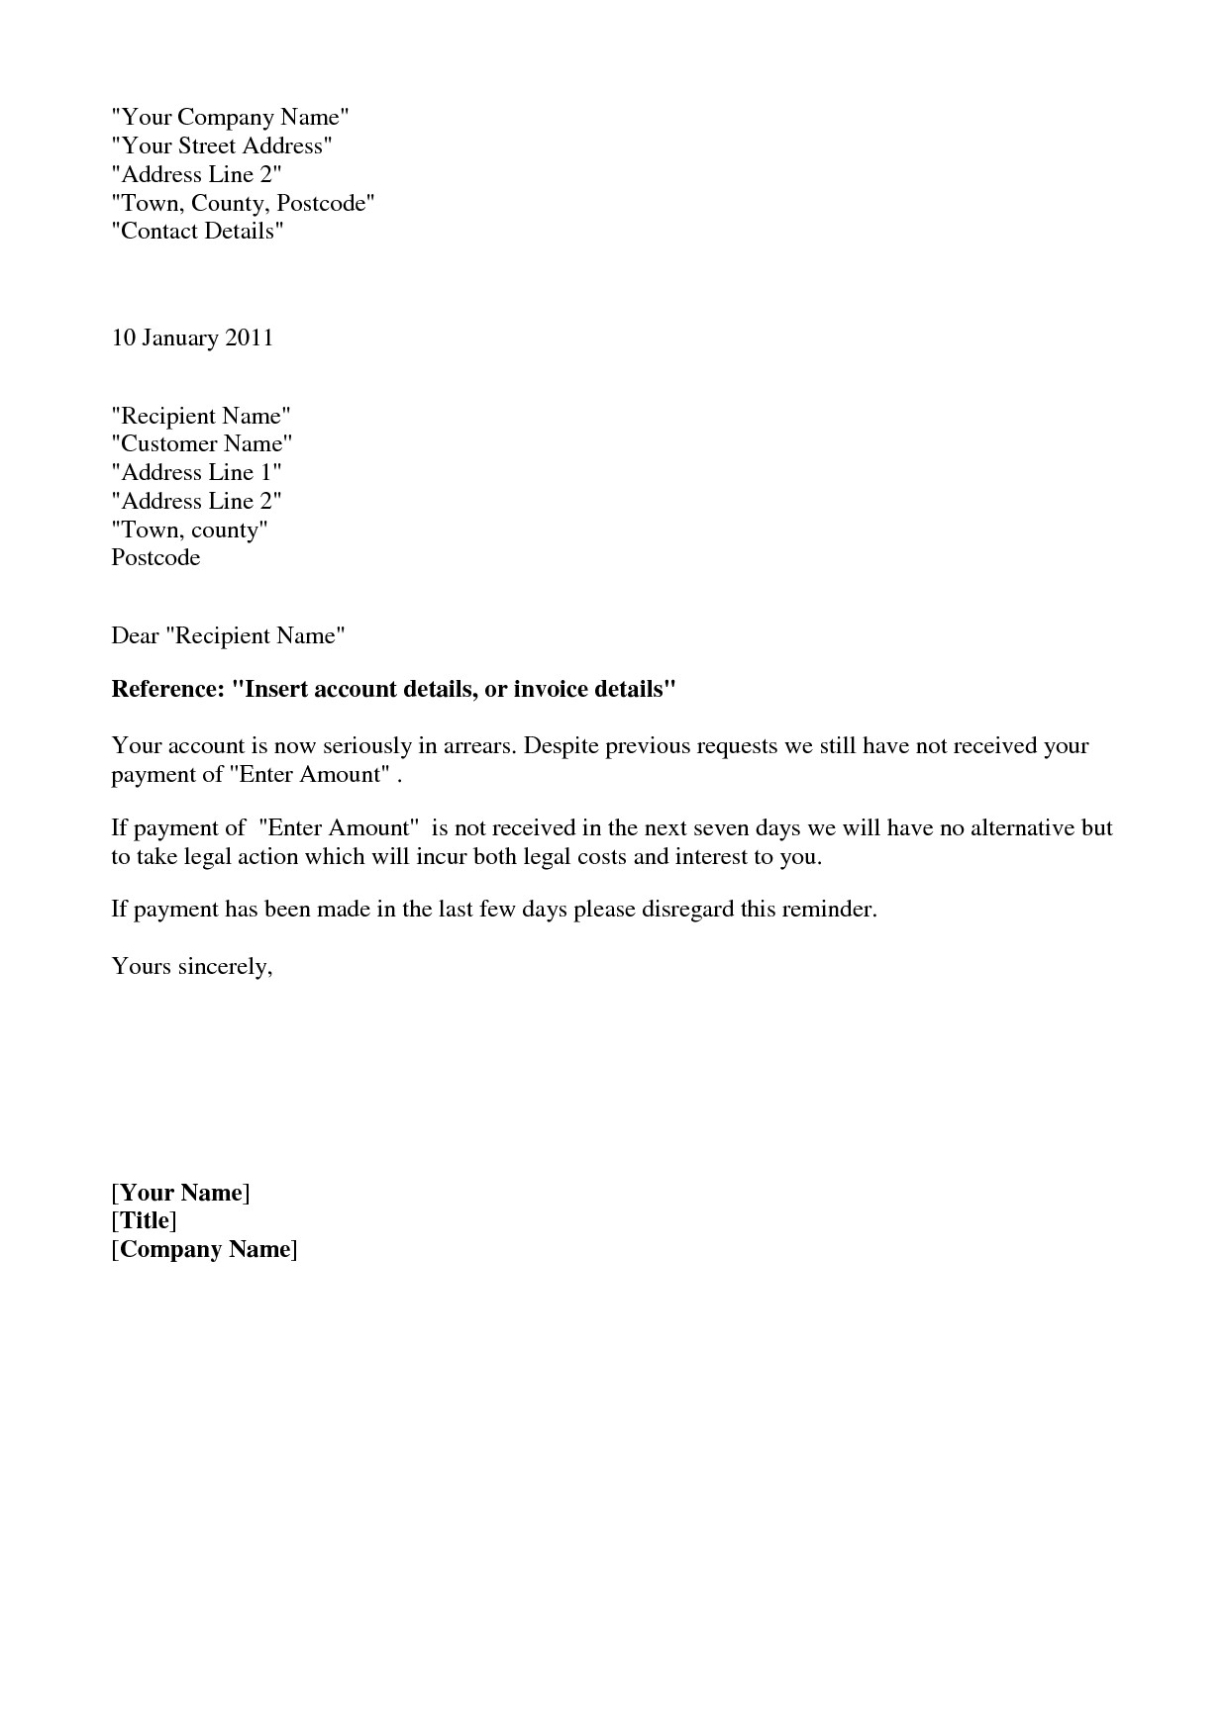 Final Notice Before Legal Action Letter Template Uk Samples – Letter Pertaining To Legal Debt Collection Letter Template